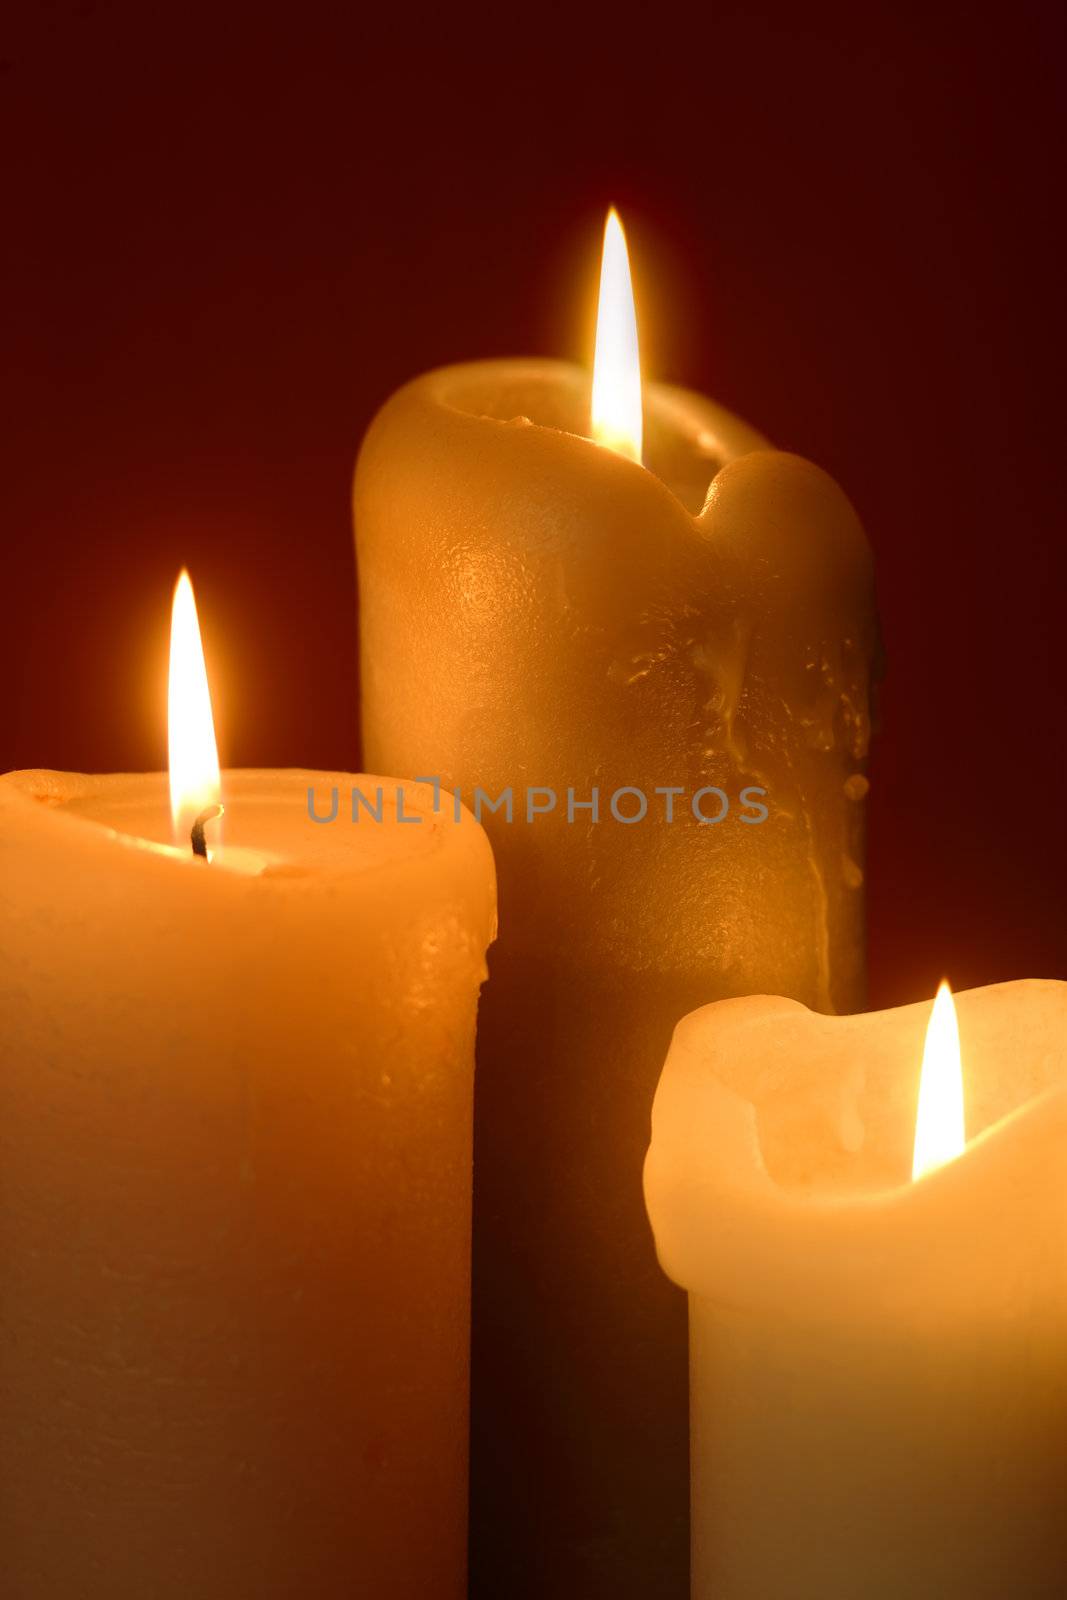 Three lit candles as a background for Christmas or religious theme.
